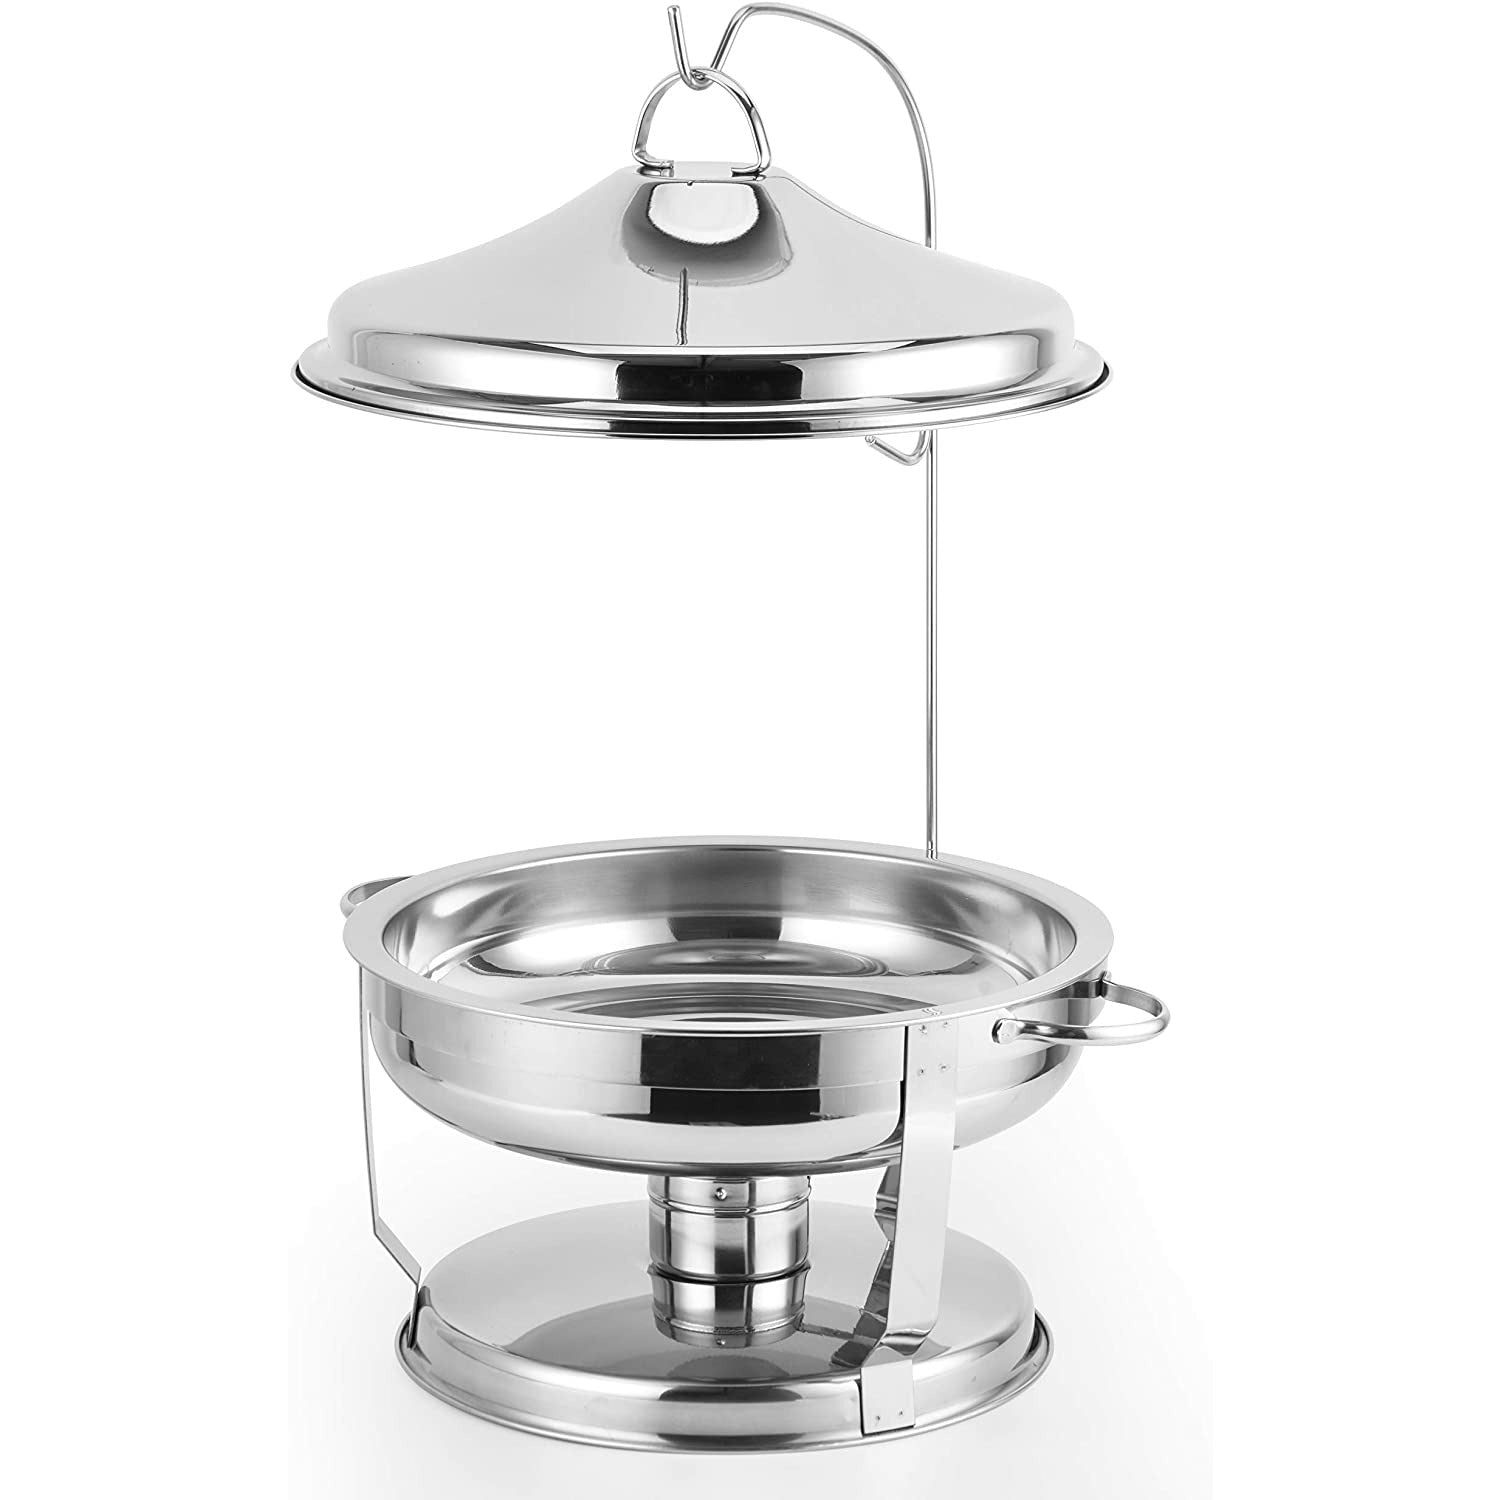 Round Chafing Dish With Hanger Stainless Steel 6 Quart